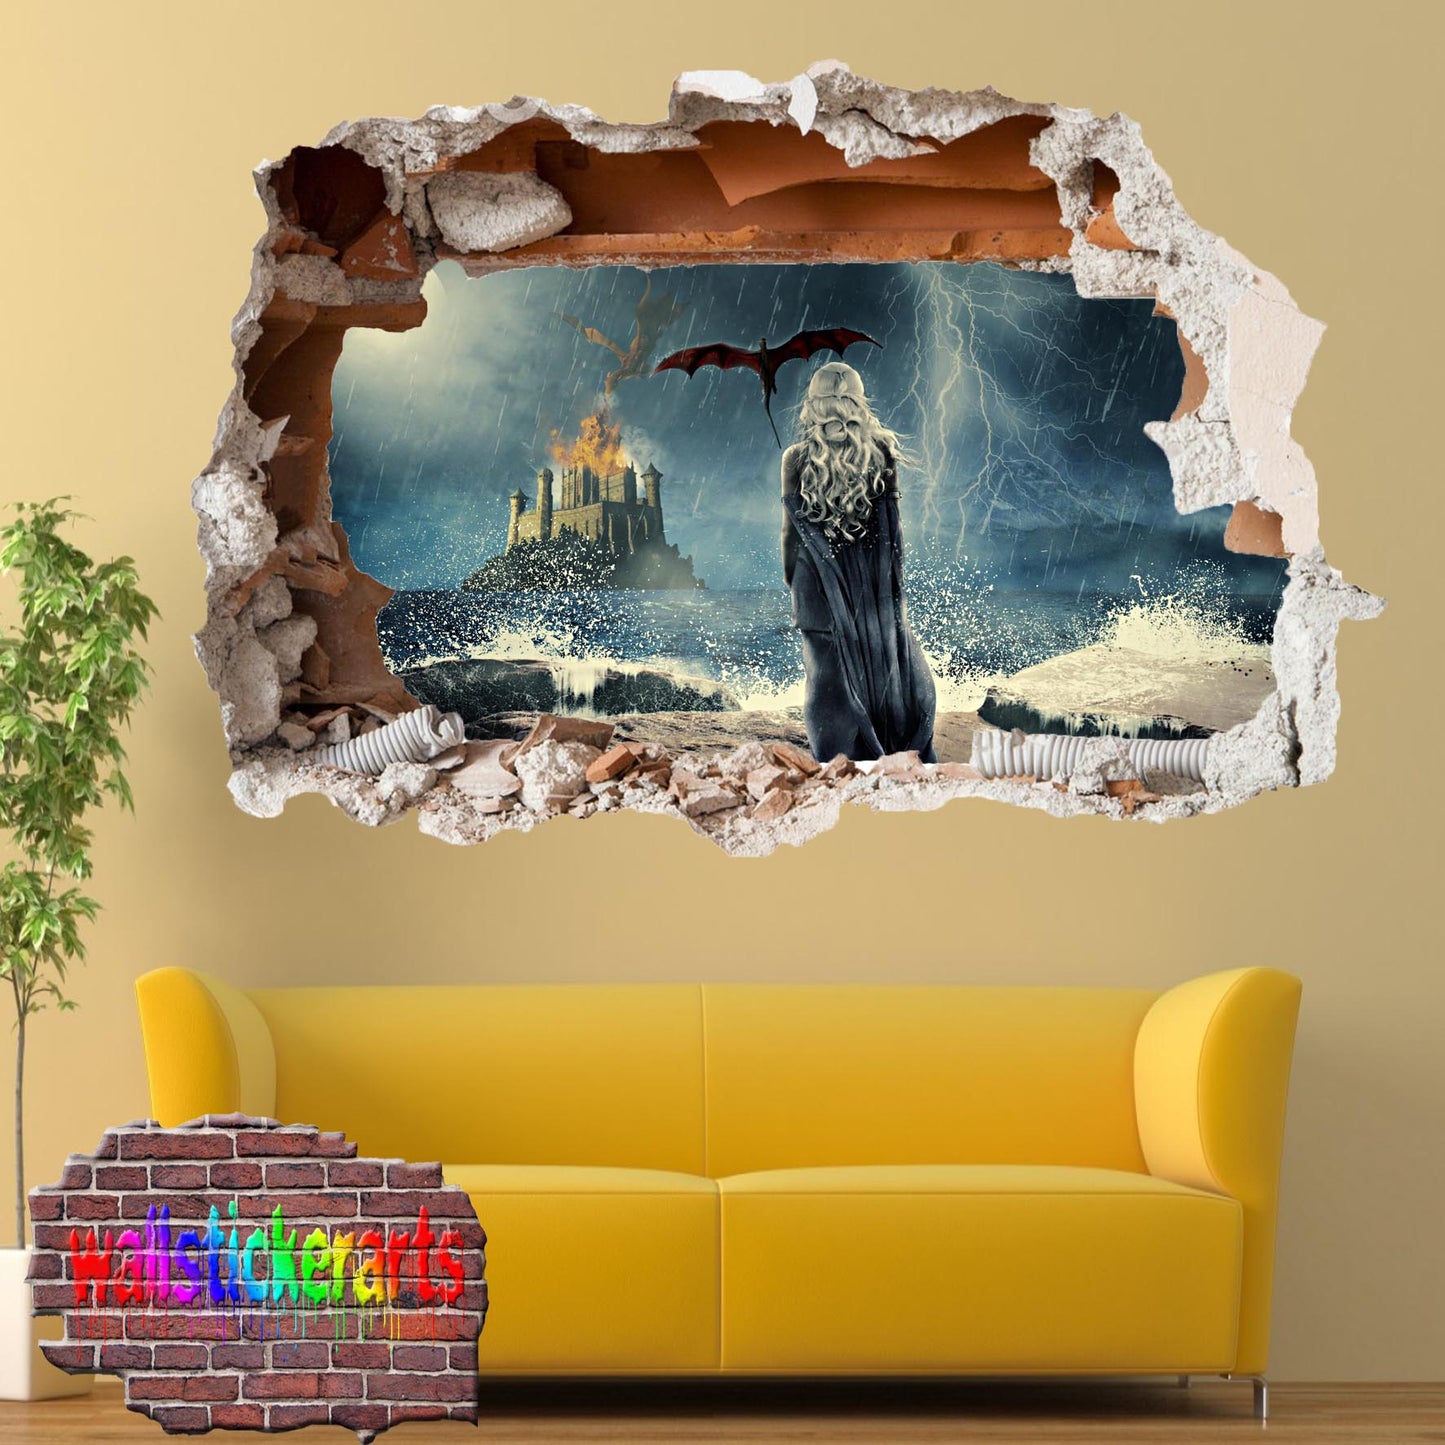 Game of Thrones Character Khaleesi wall sticker poster decal mural